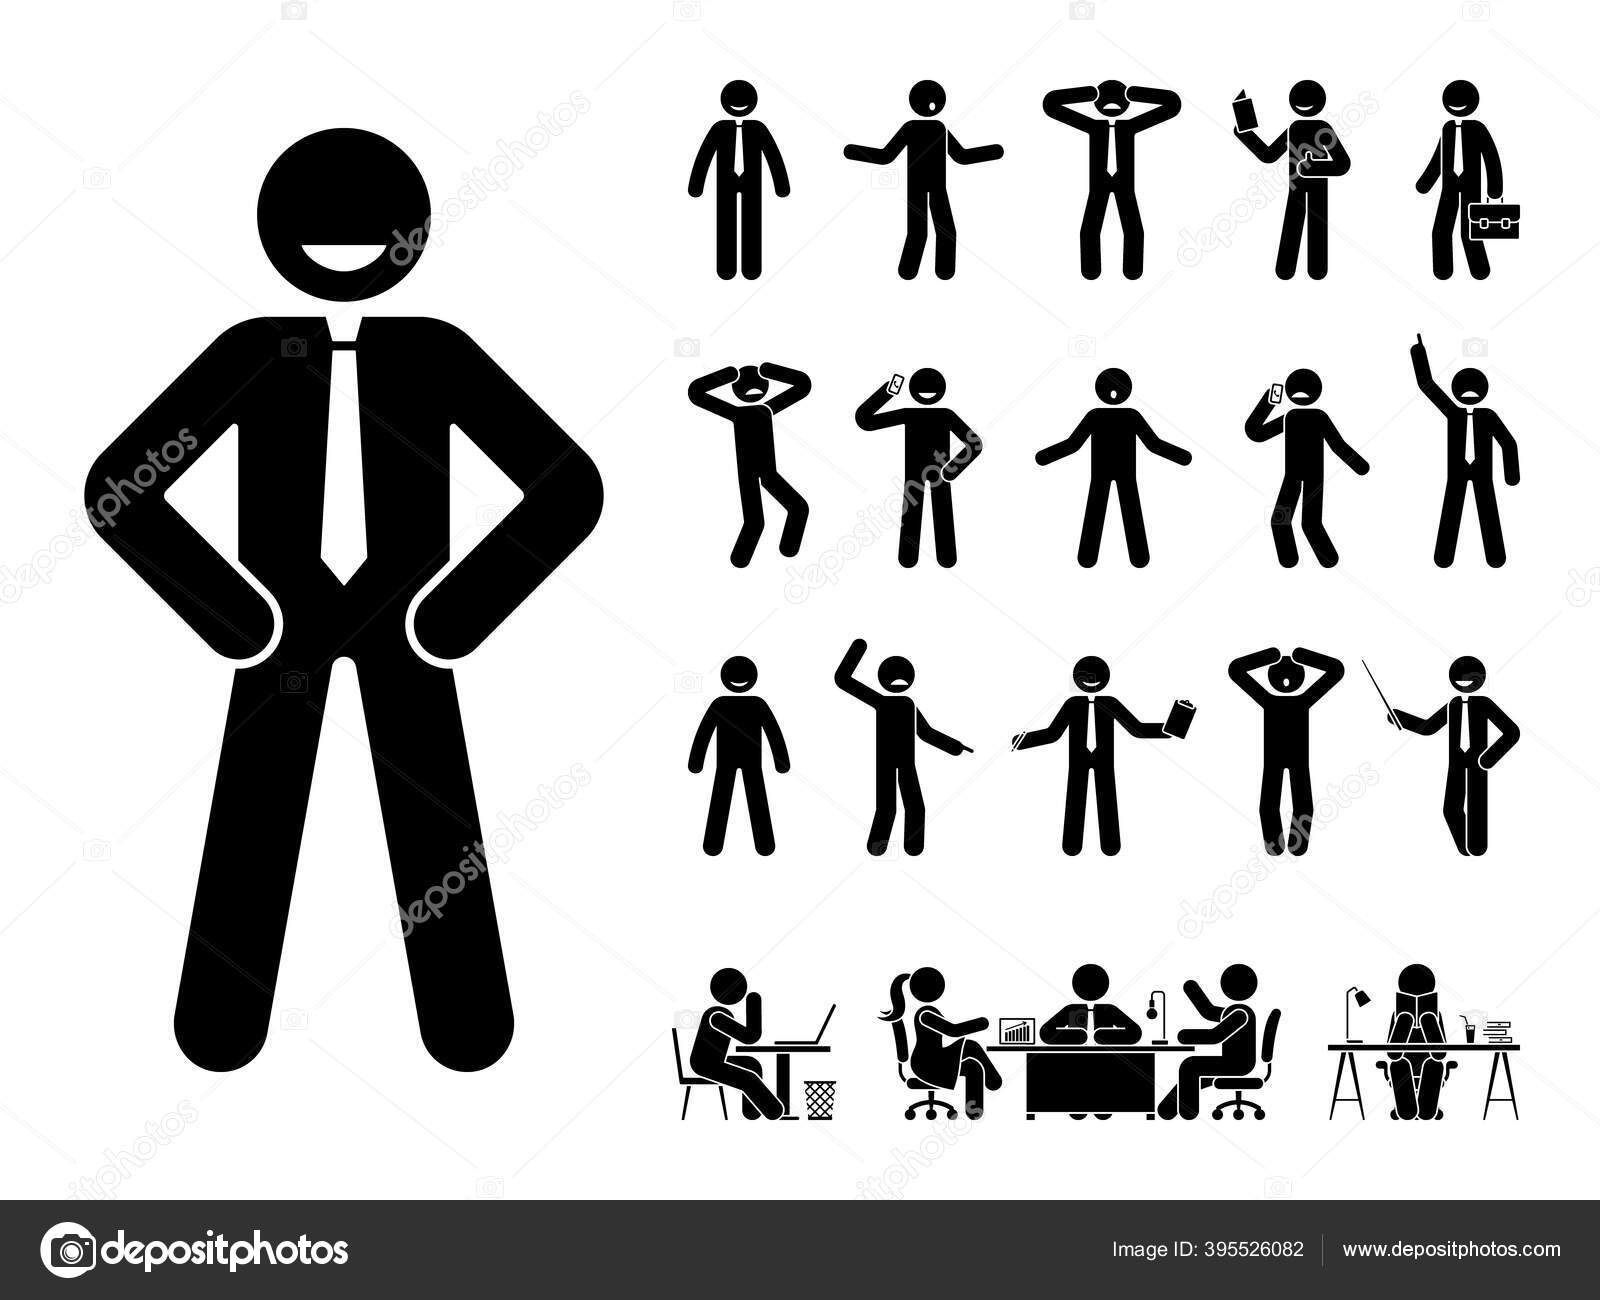 Set of man drawing, different poses, stick figure people pictogram